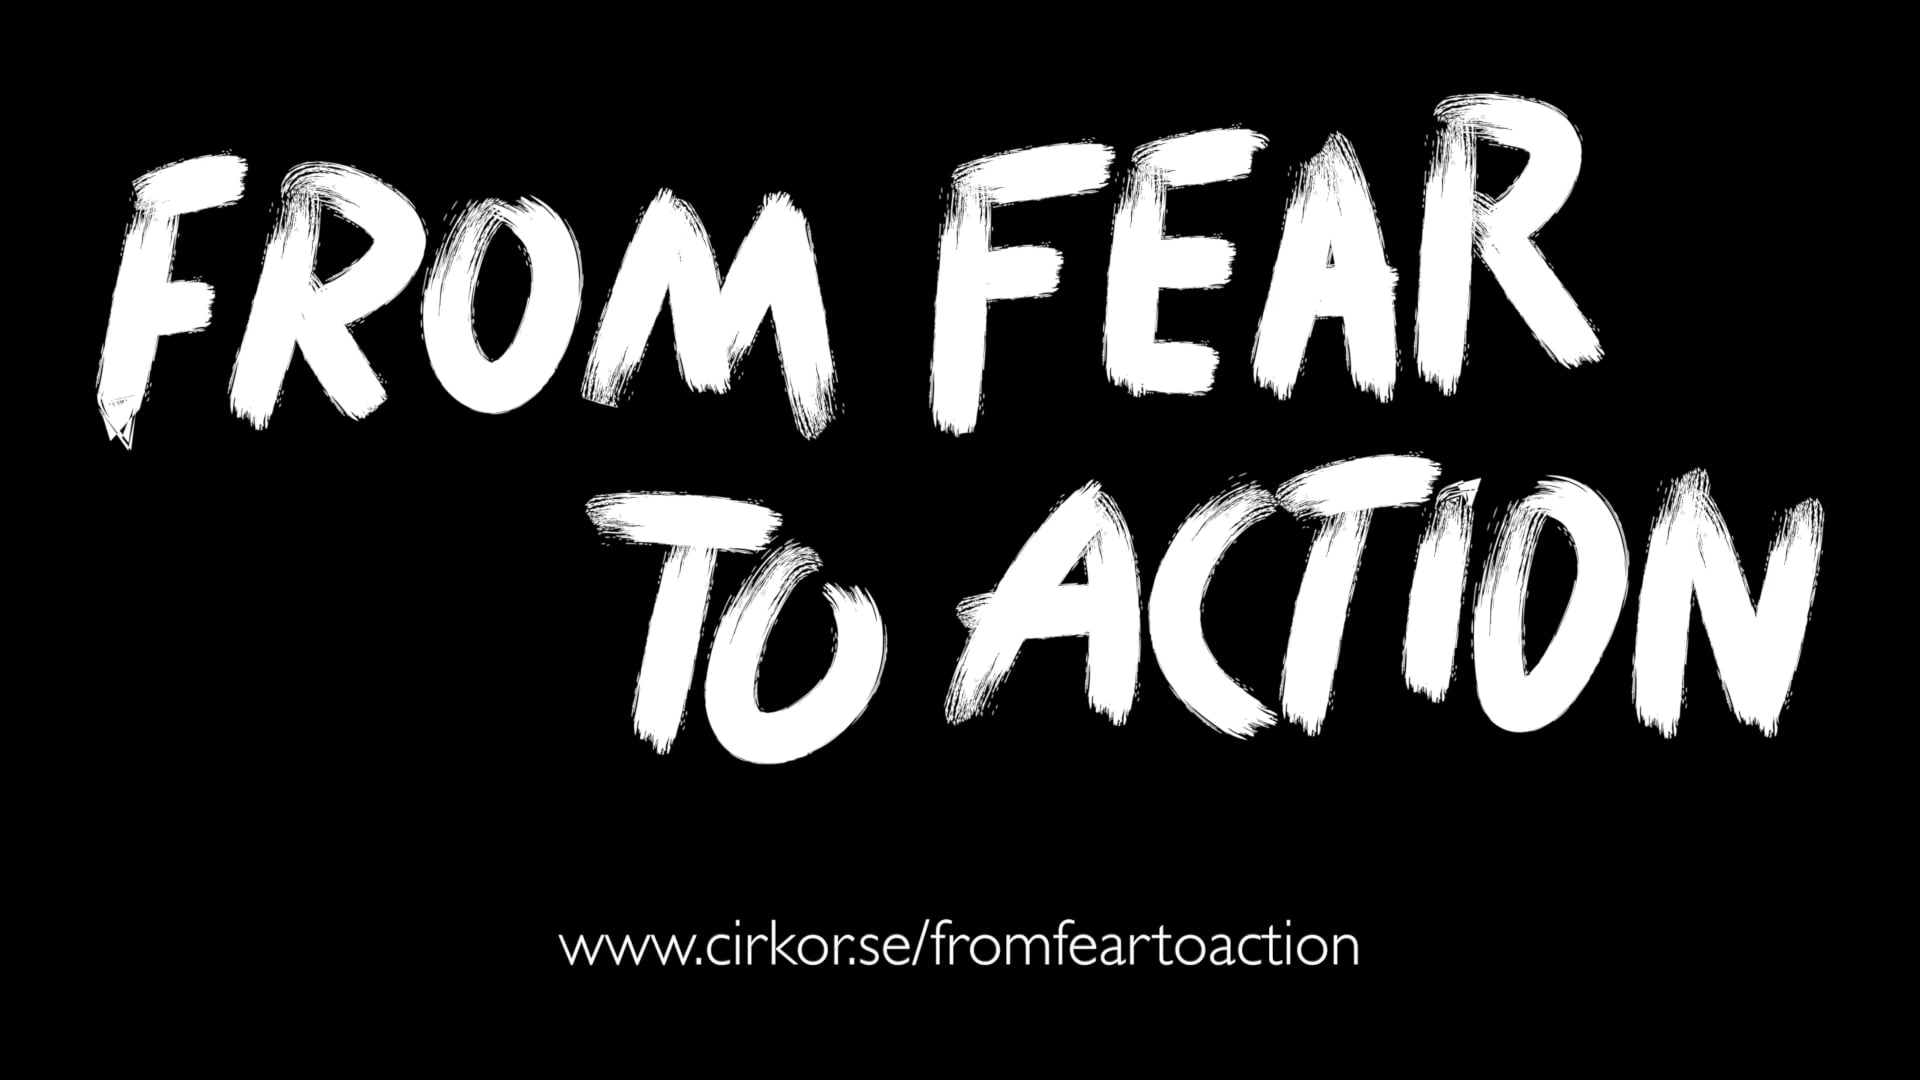 From fear to action